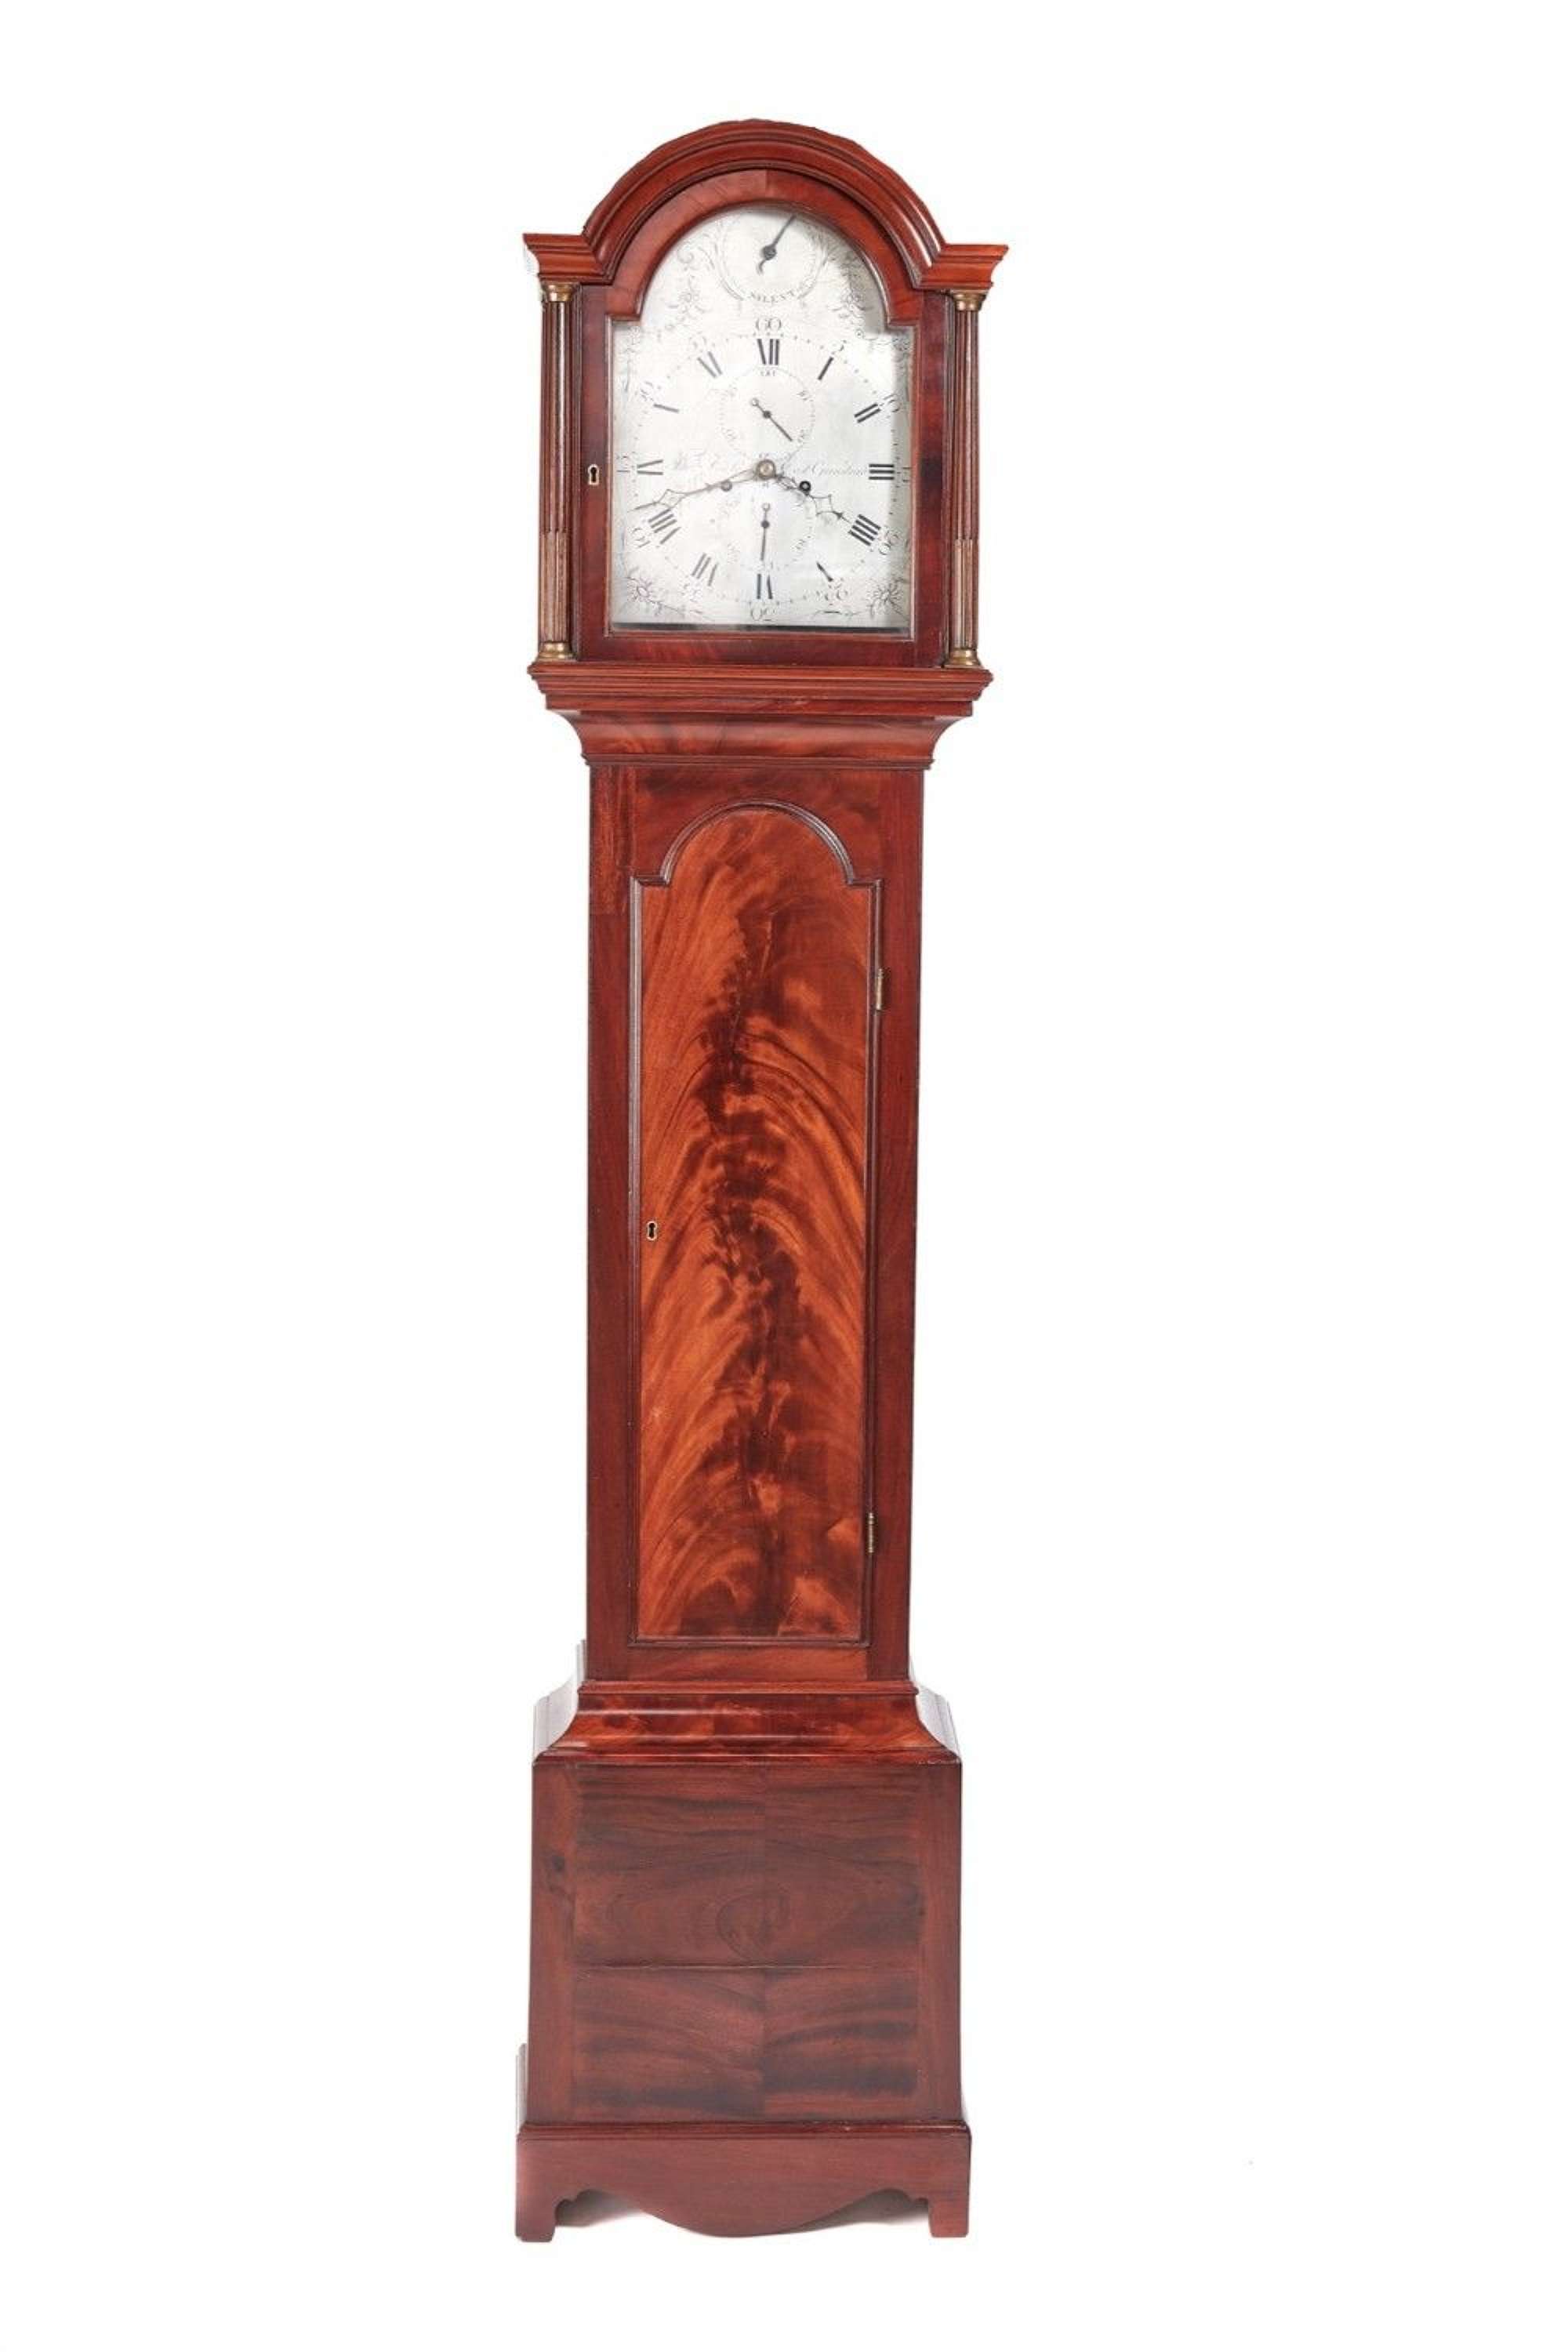 Magnificent Antique Mahogany 8 Day Longcase Clock By Thomas Fowle Of East Grinstead